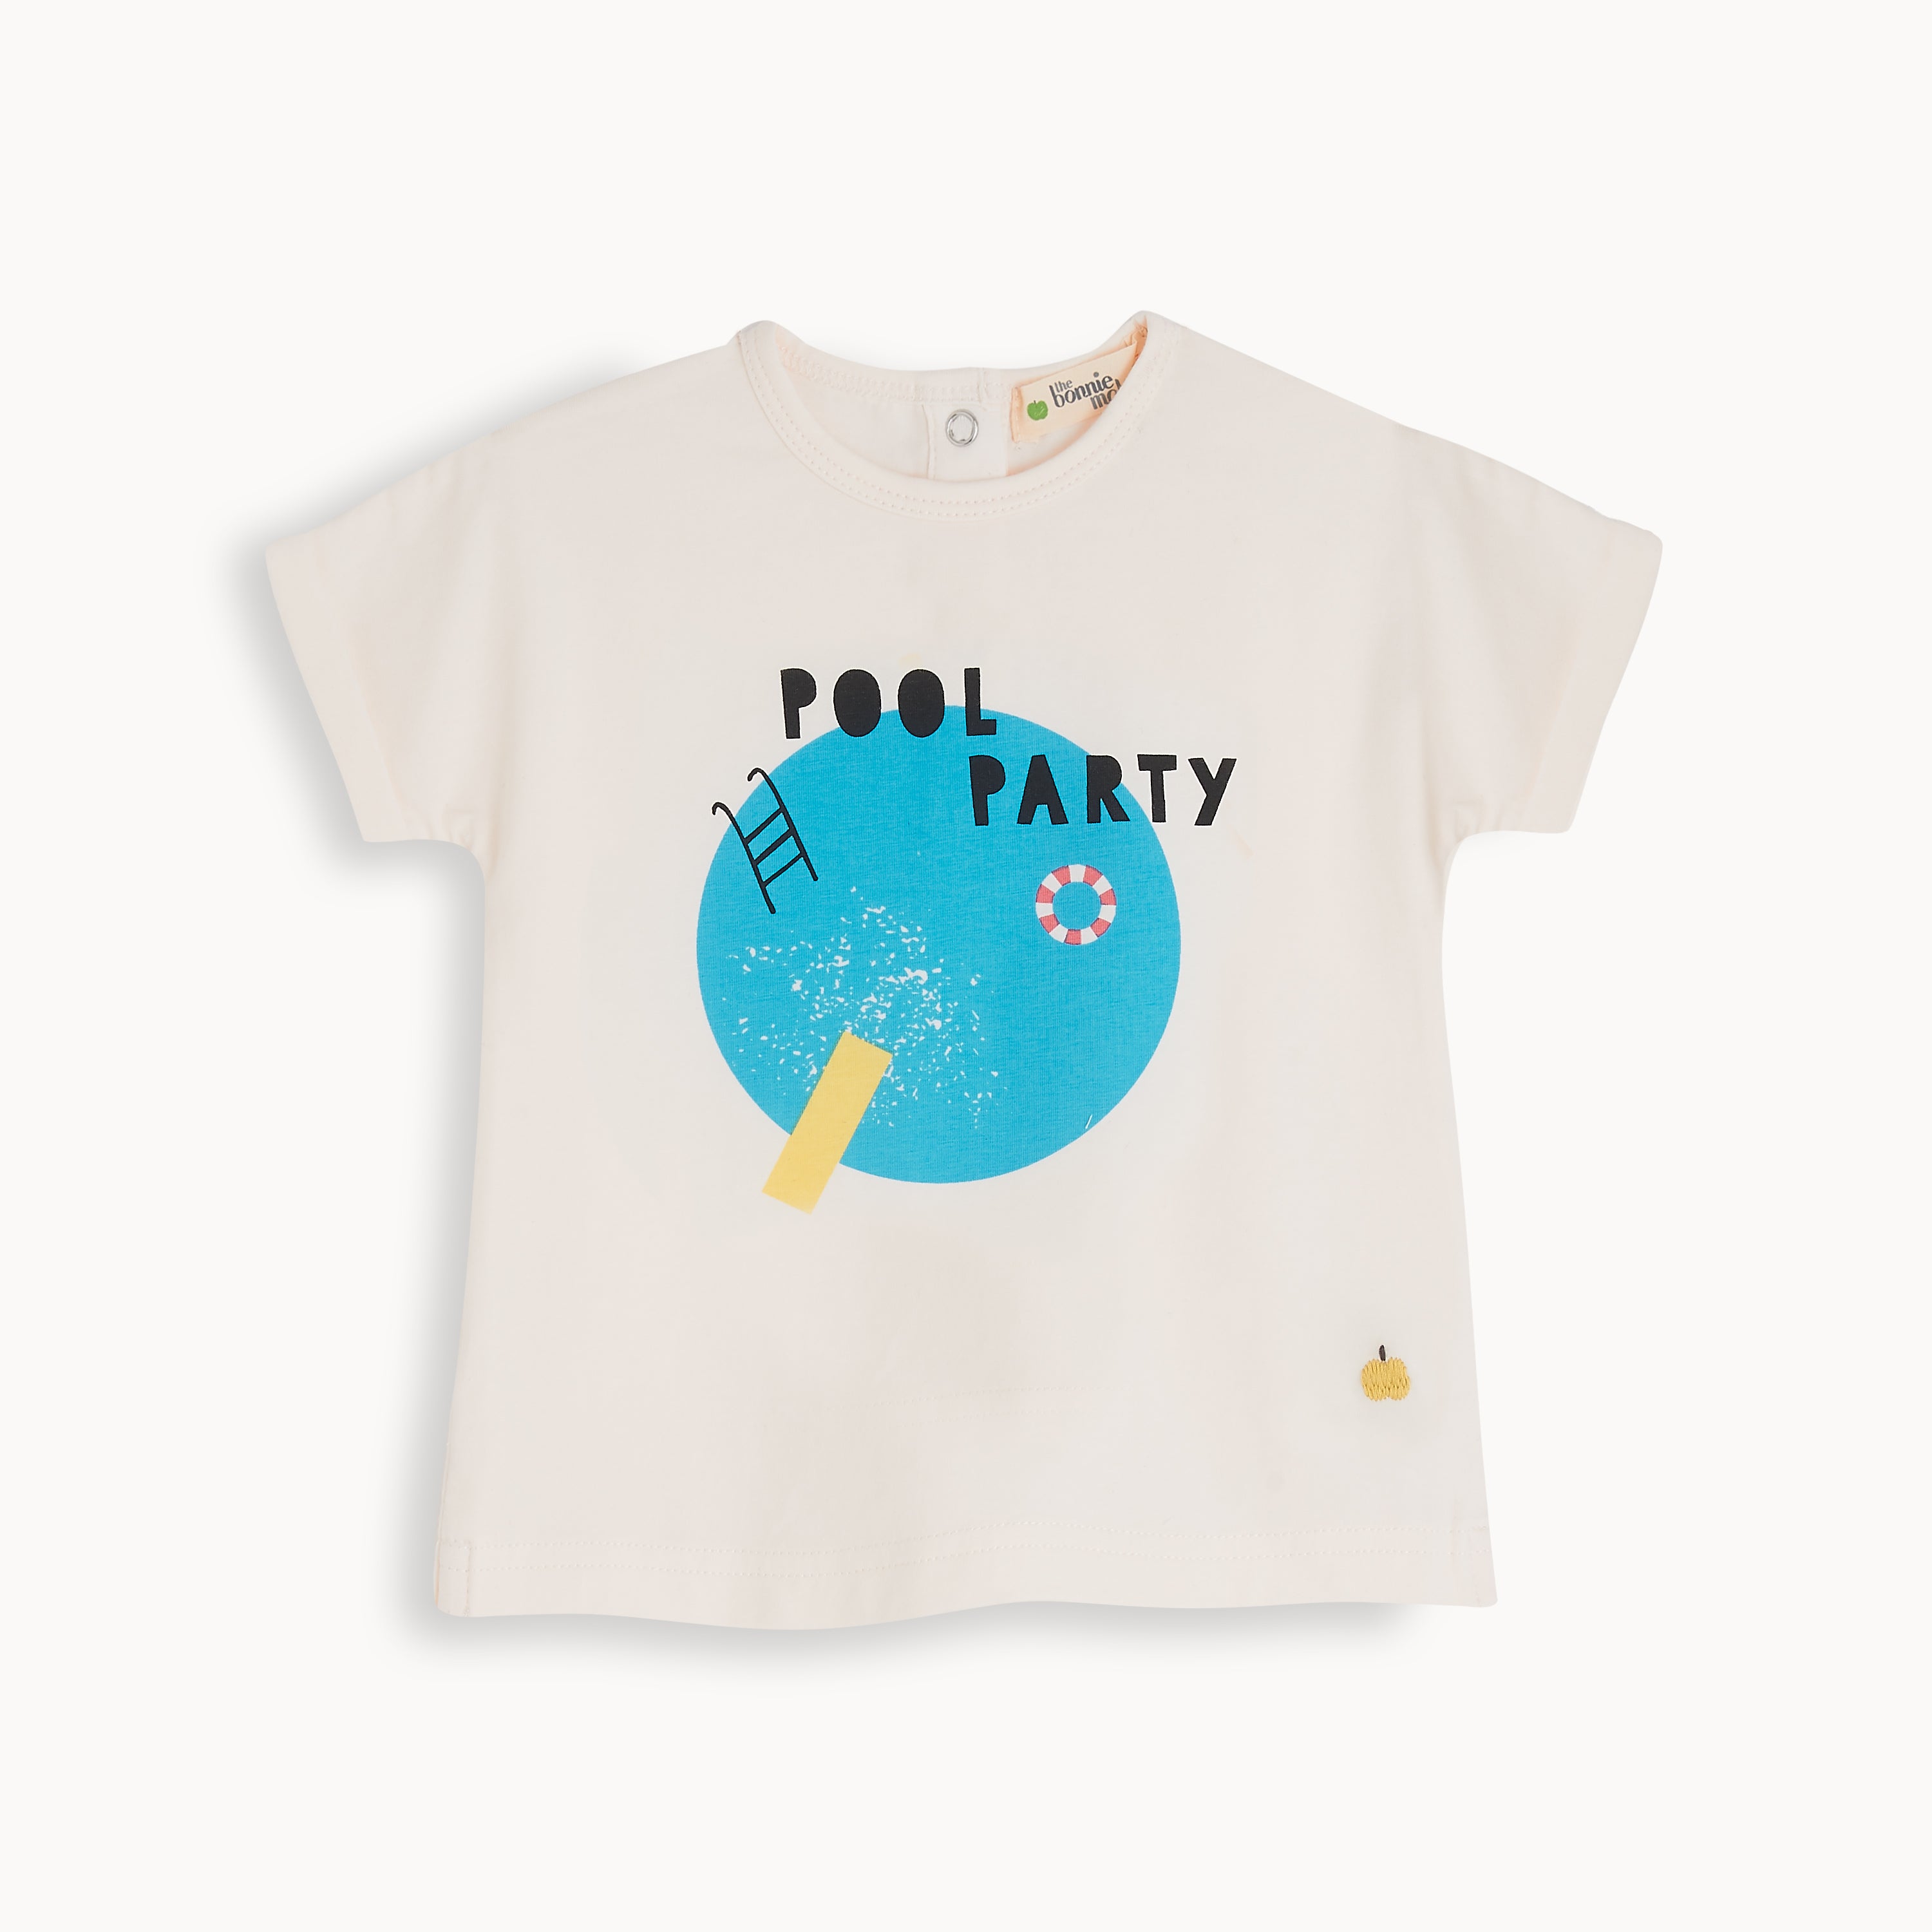 Pool Party "Percy" Shirt (Organic Cotton)